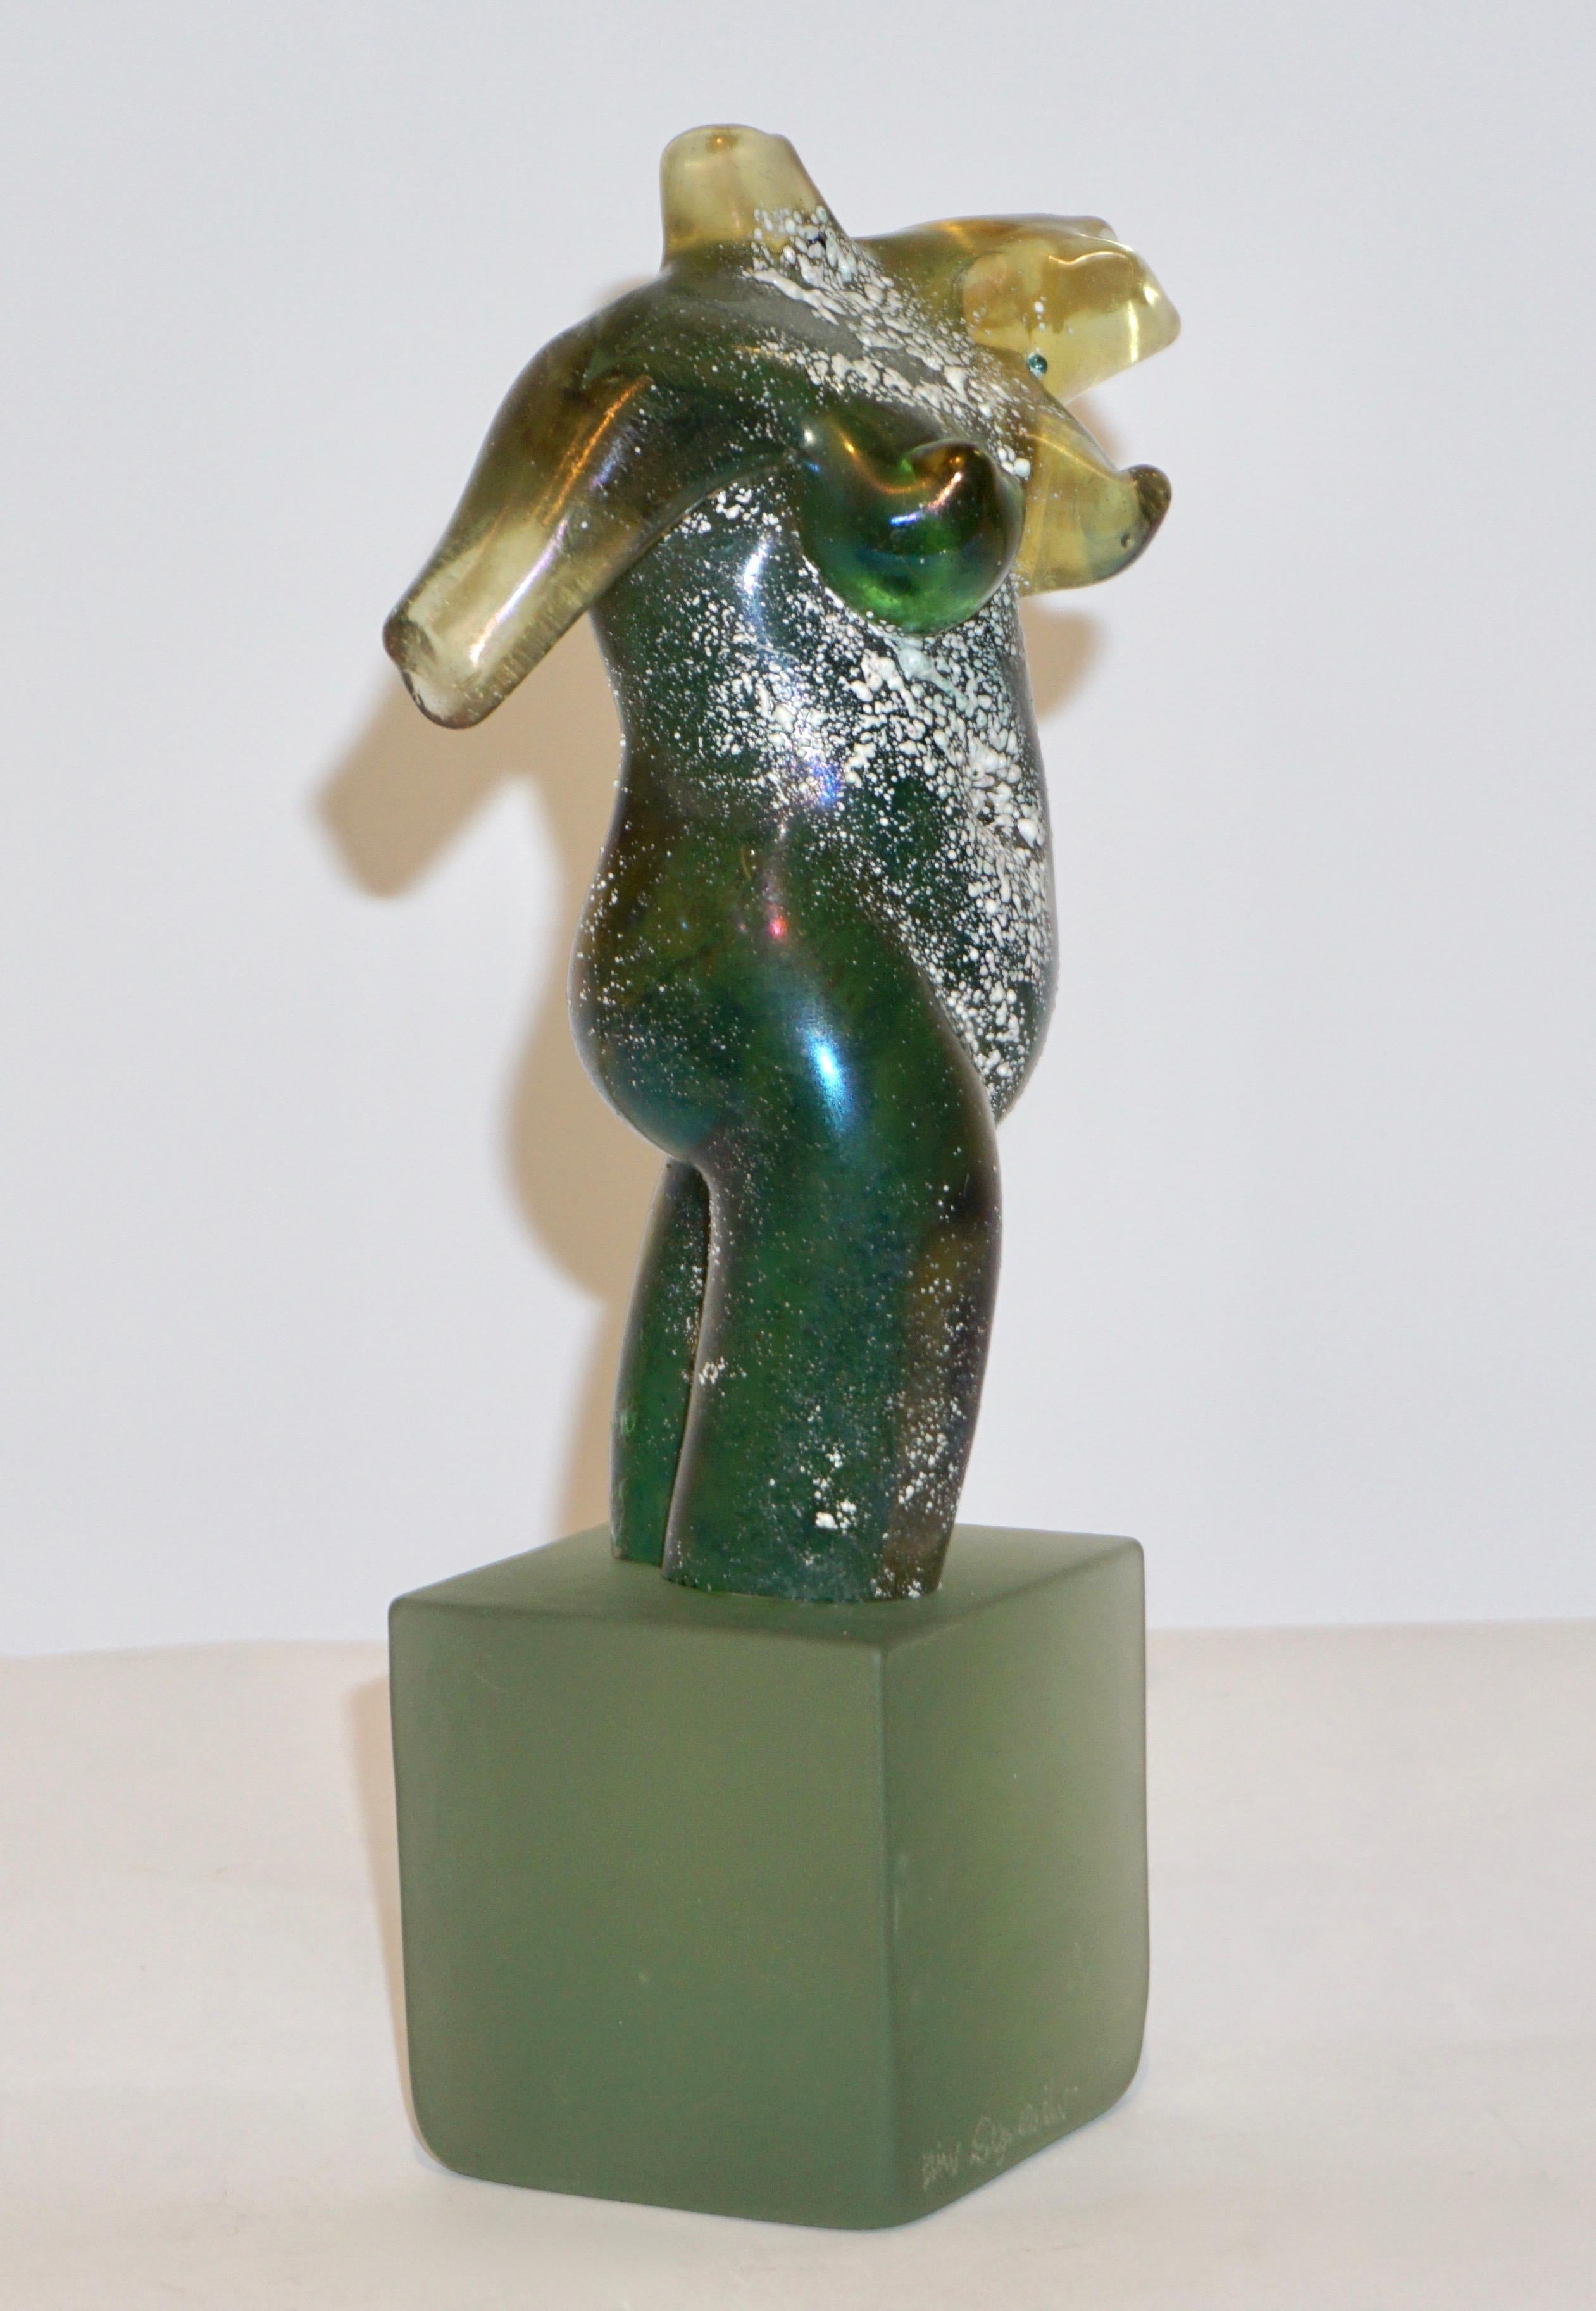 An exquisite vintage Work of Art signed Pino Signoretto, an iridescent nude sculpture in a sophisticated aqua green blown Murano glass, textured with the technique scavo that creates shimmering reflections and gives movement to the piece, raised on